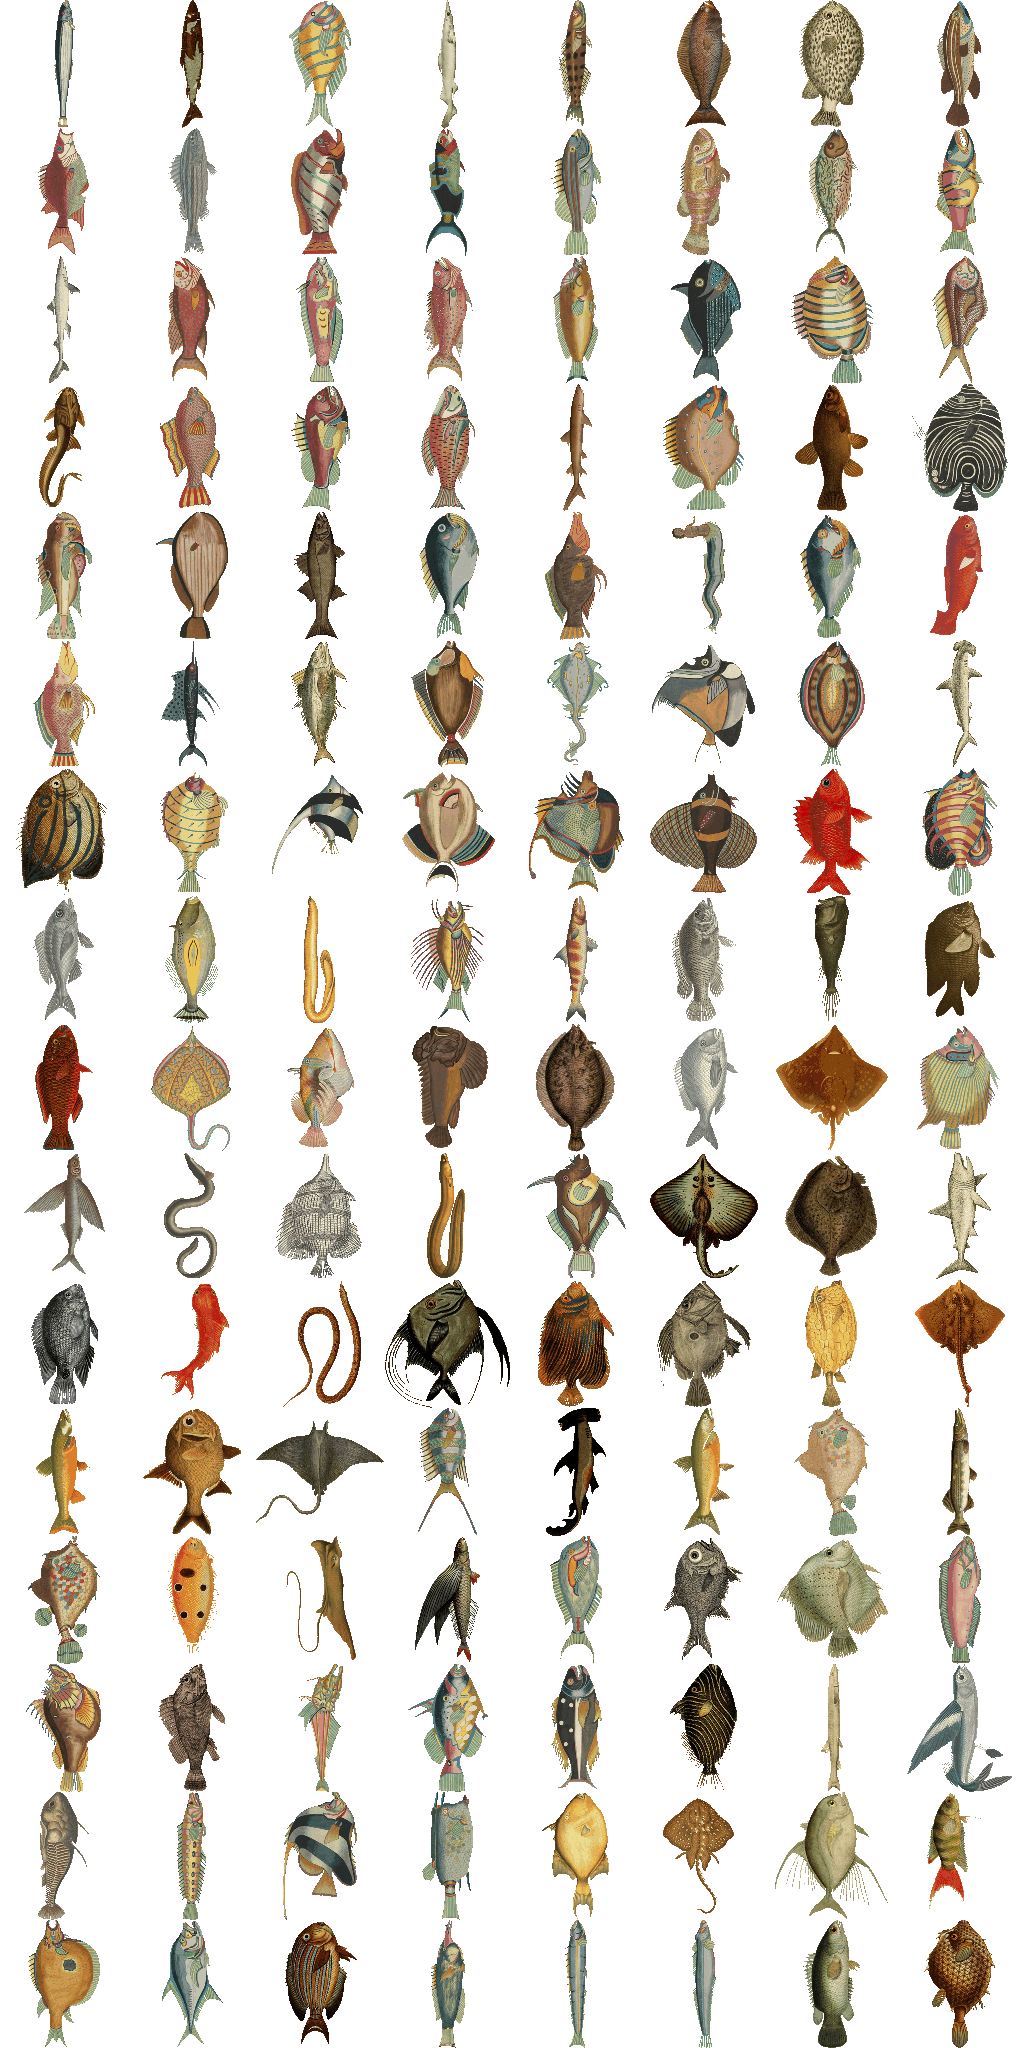 A grid of illustrated fish in 8 columns by 16 rows